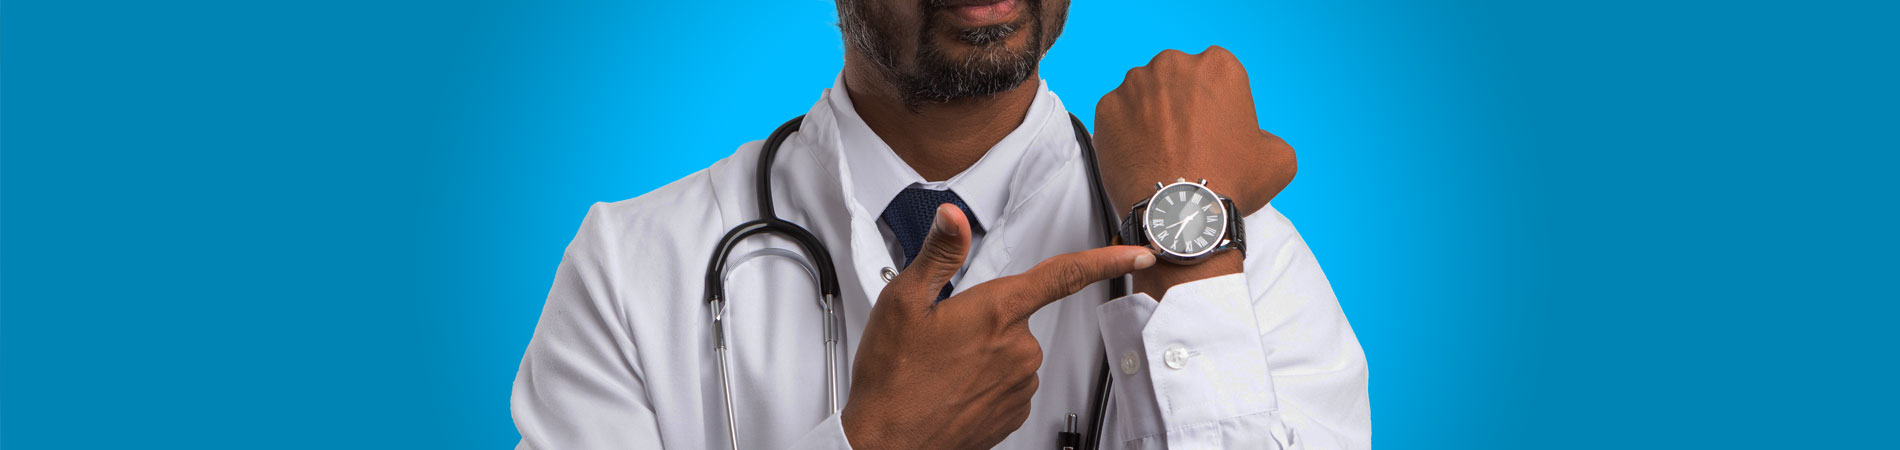 doctor pointing at watch